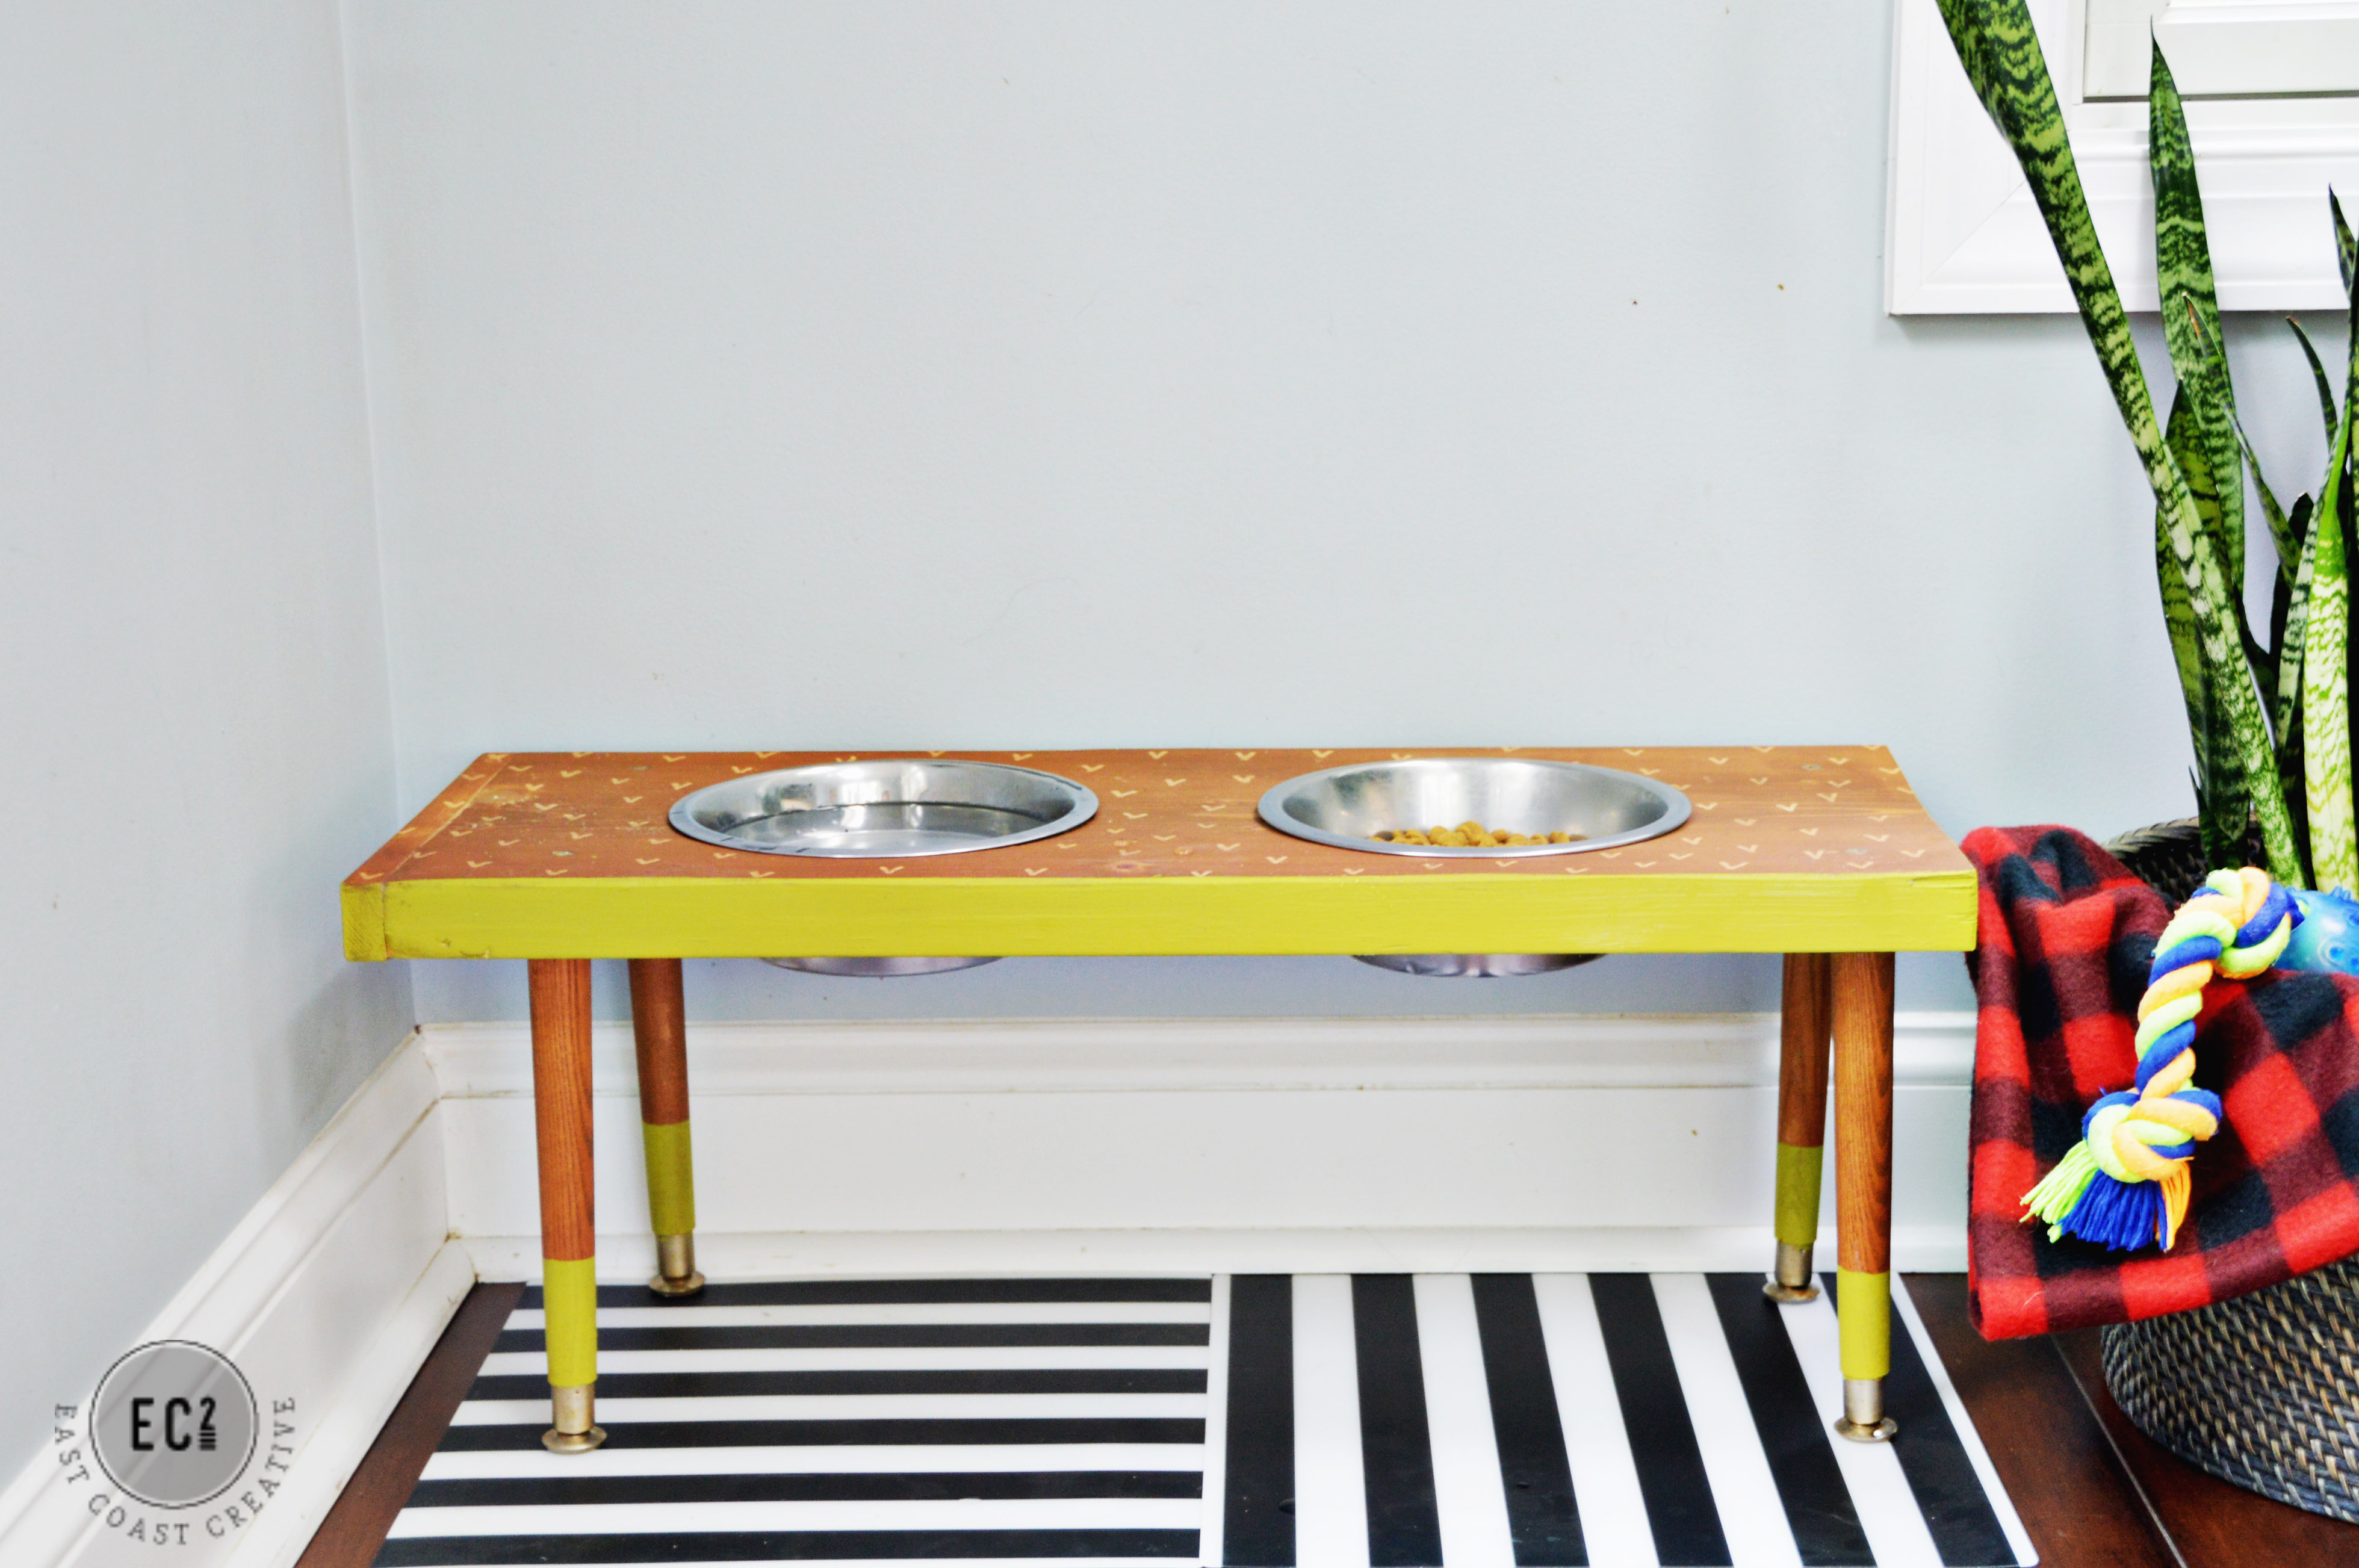 19 Brilliant DIY Projects For Pet Food Stations